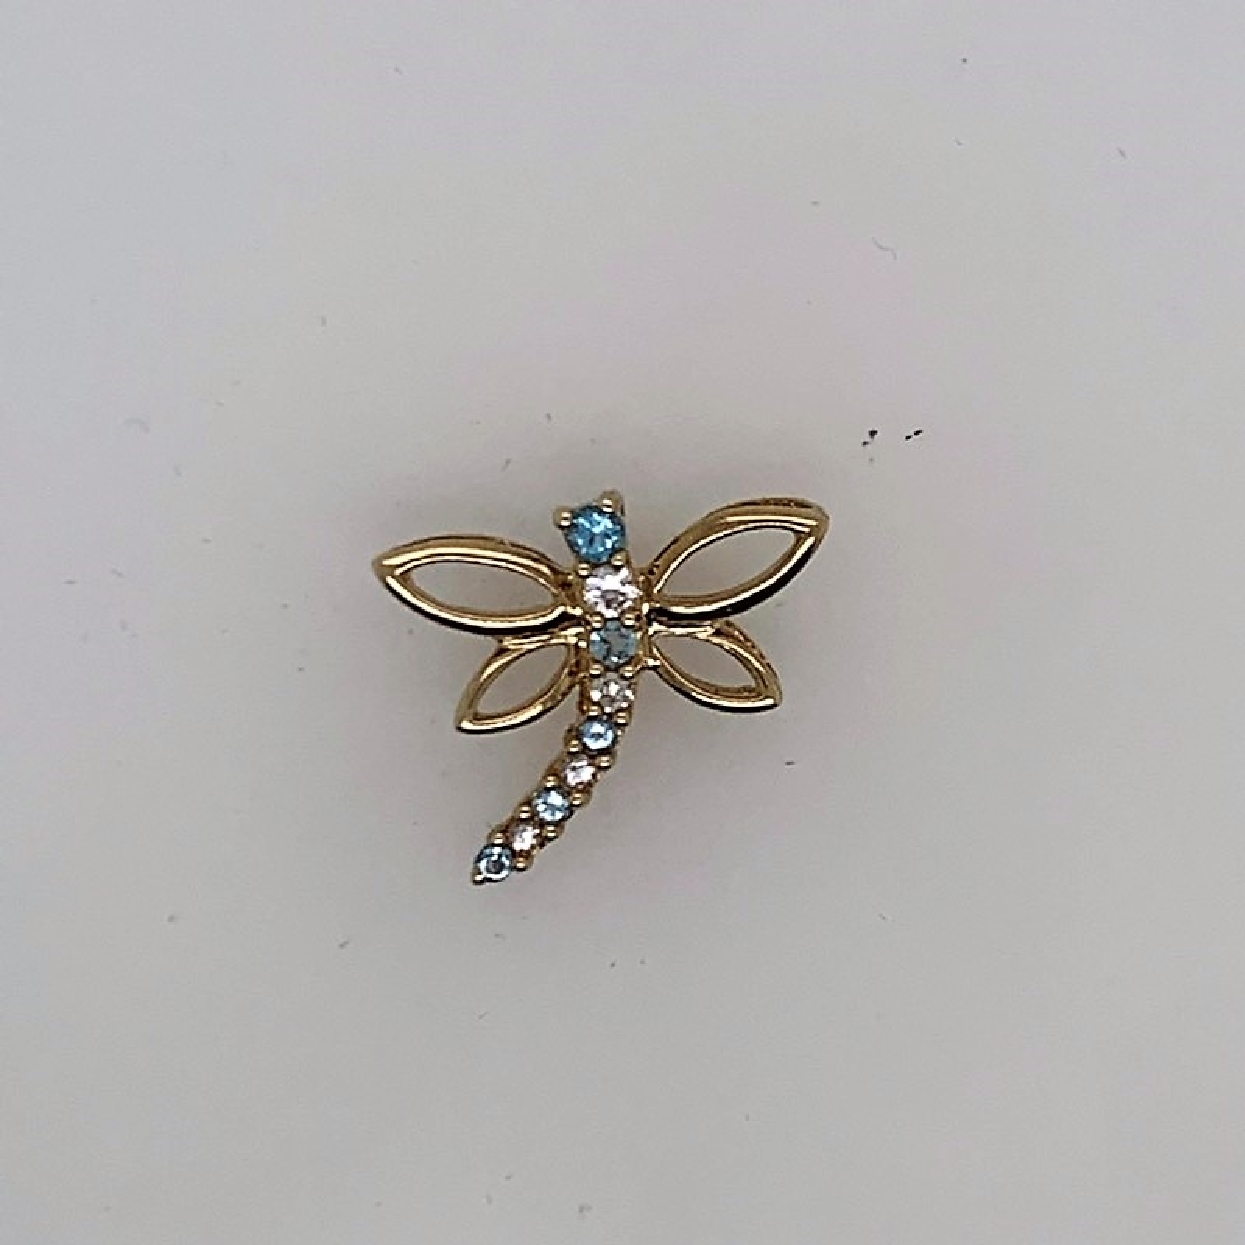 10K Yellow Gold Dragonfly Charm/Pendant with Blue and White Topaz